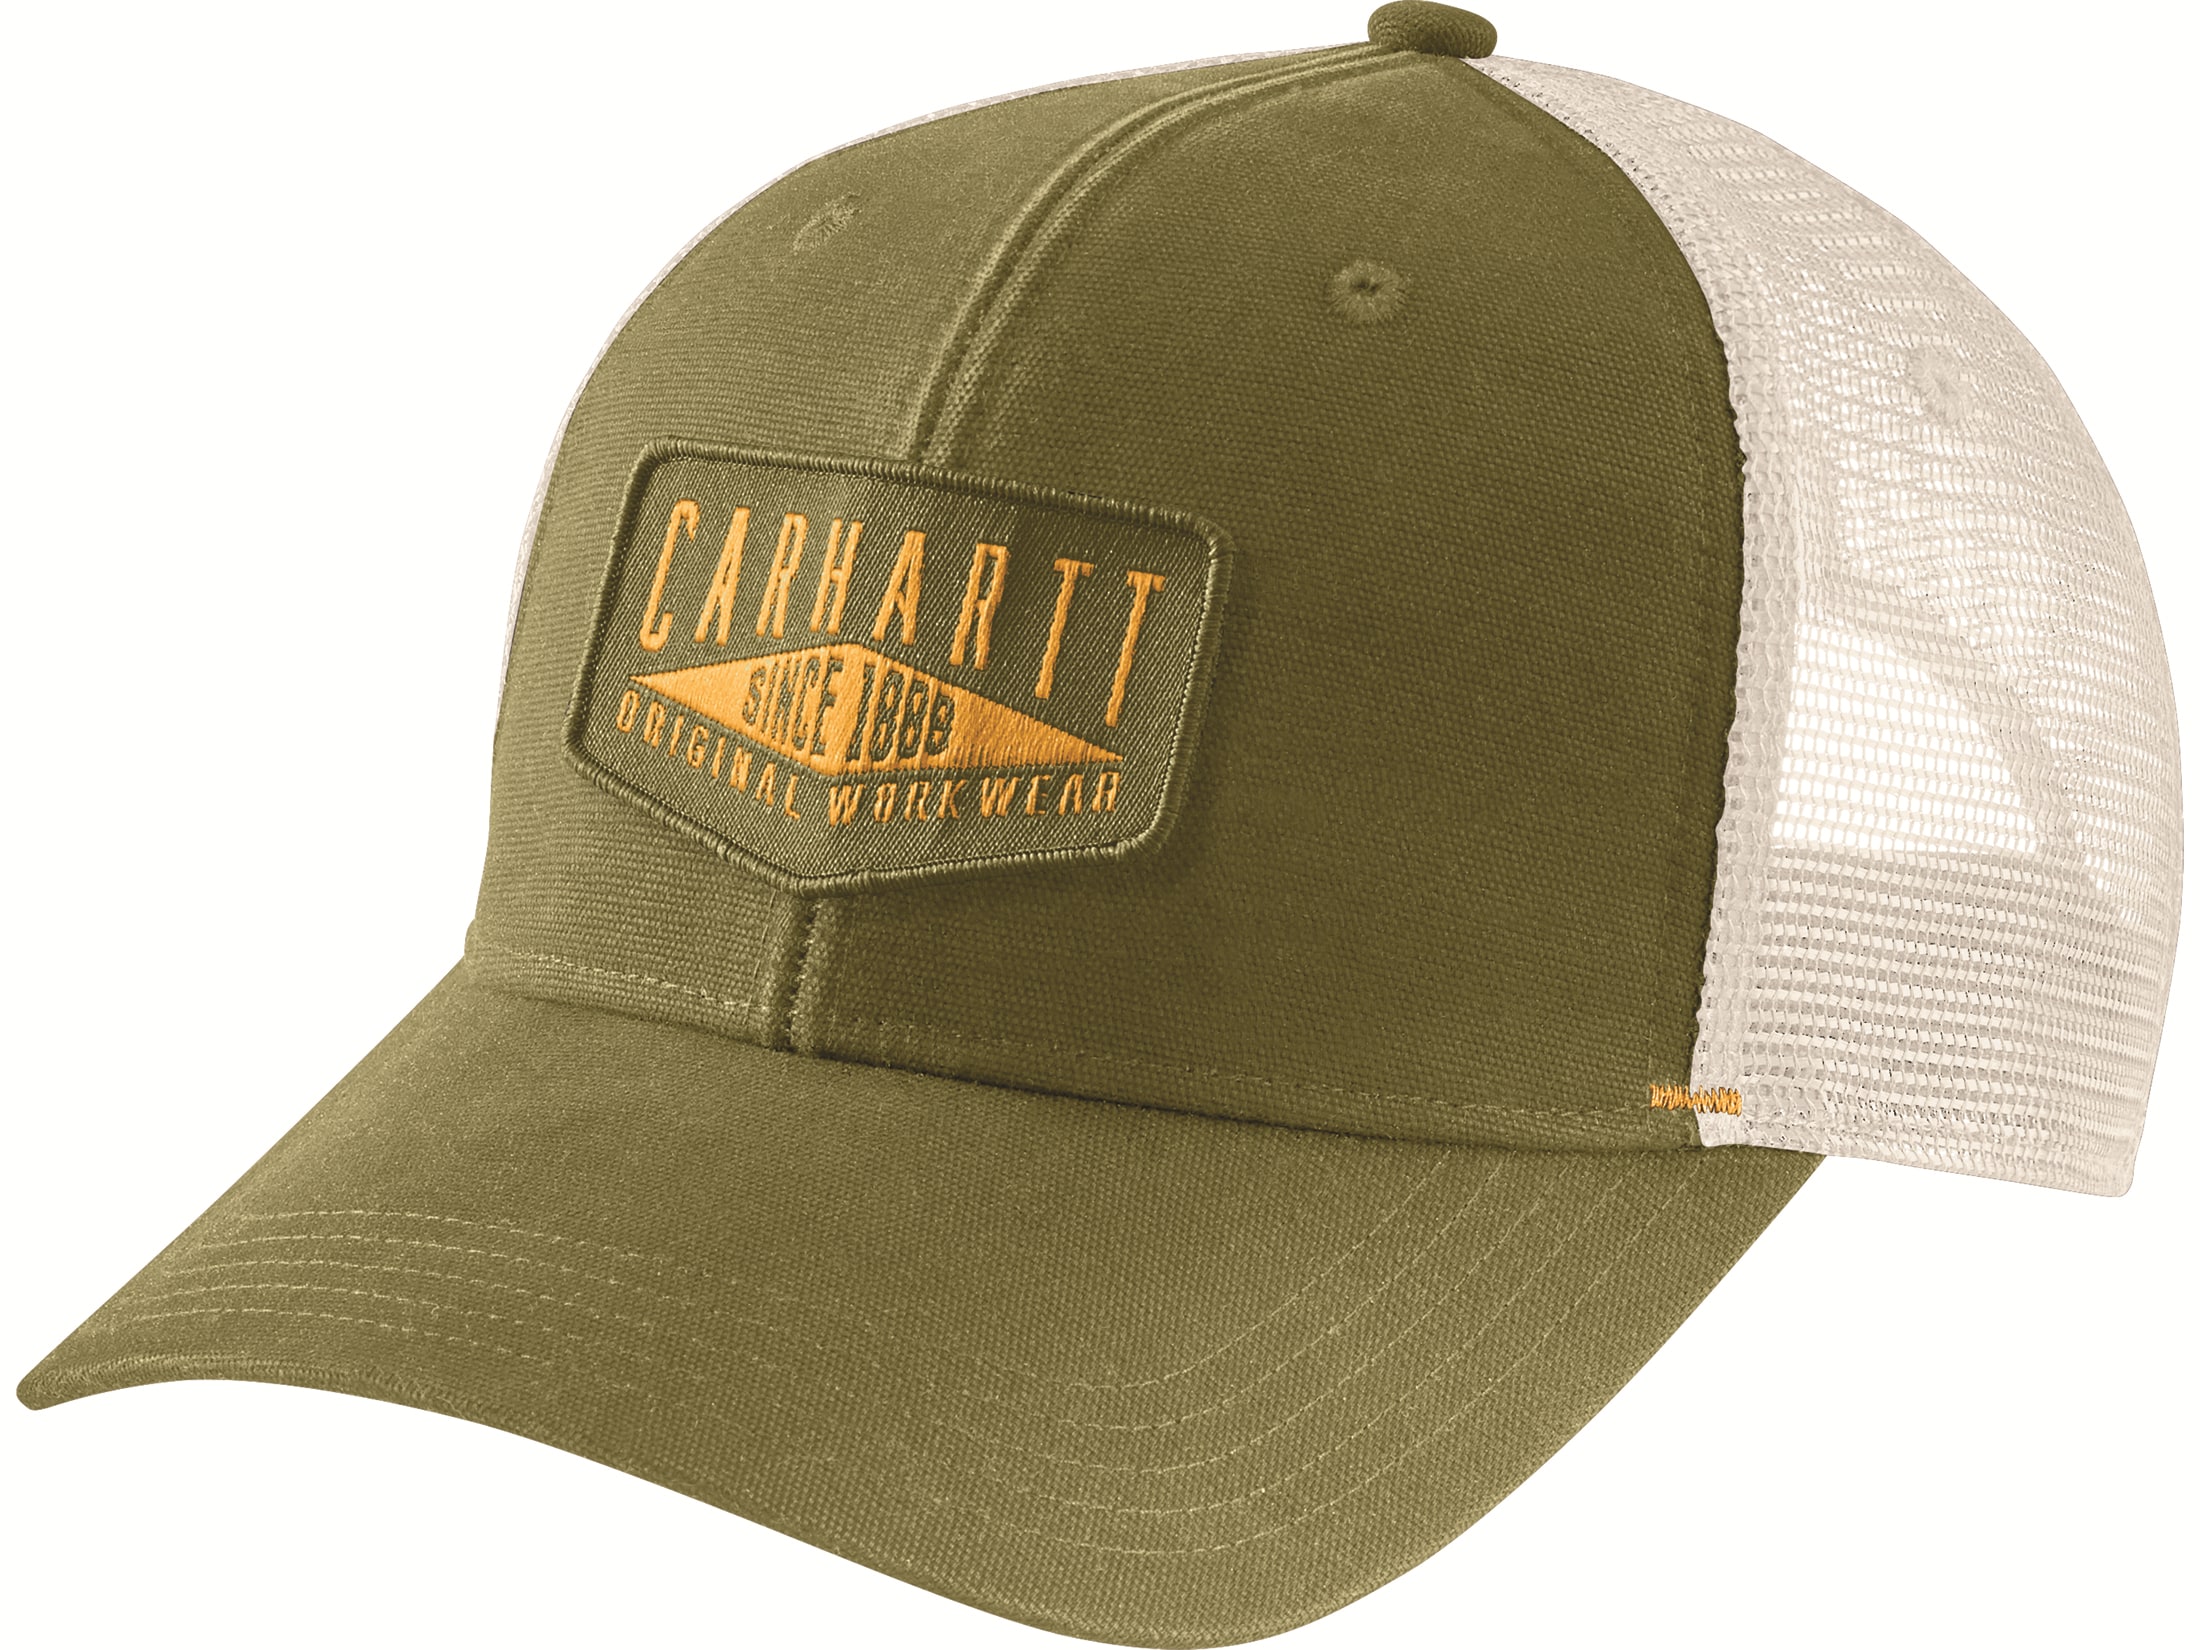 Carhartt Men's Canvas Workwear Patch Cap True Olive One Size Fits Most